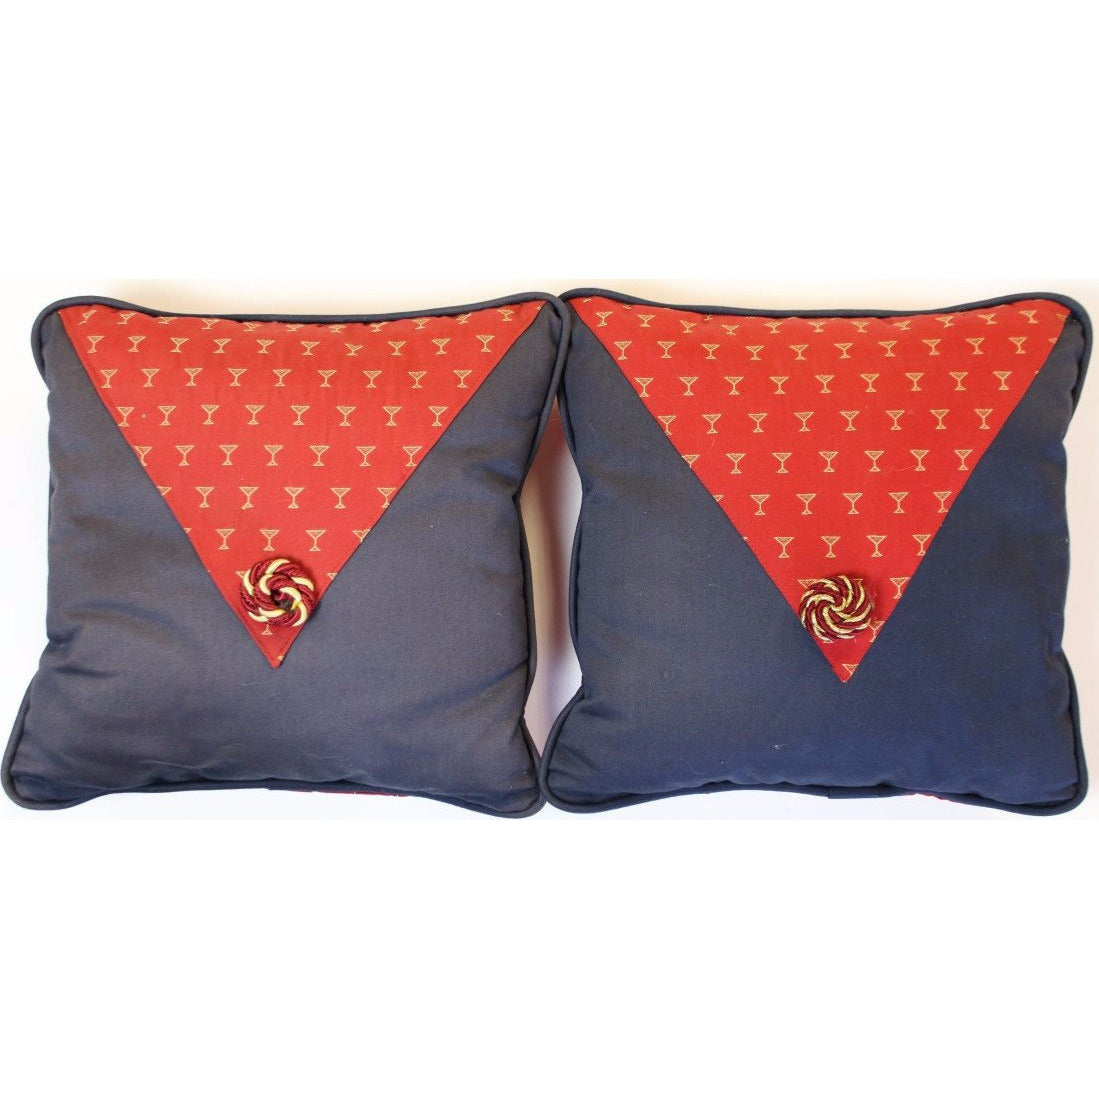 Pair of Cherry Red Martini Glass Pillows